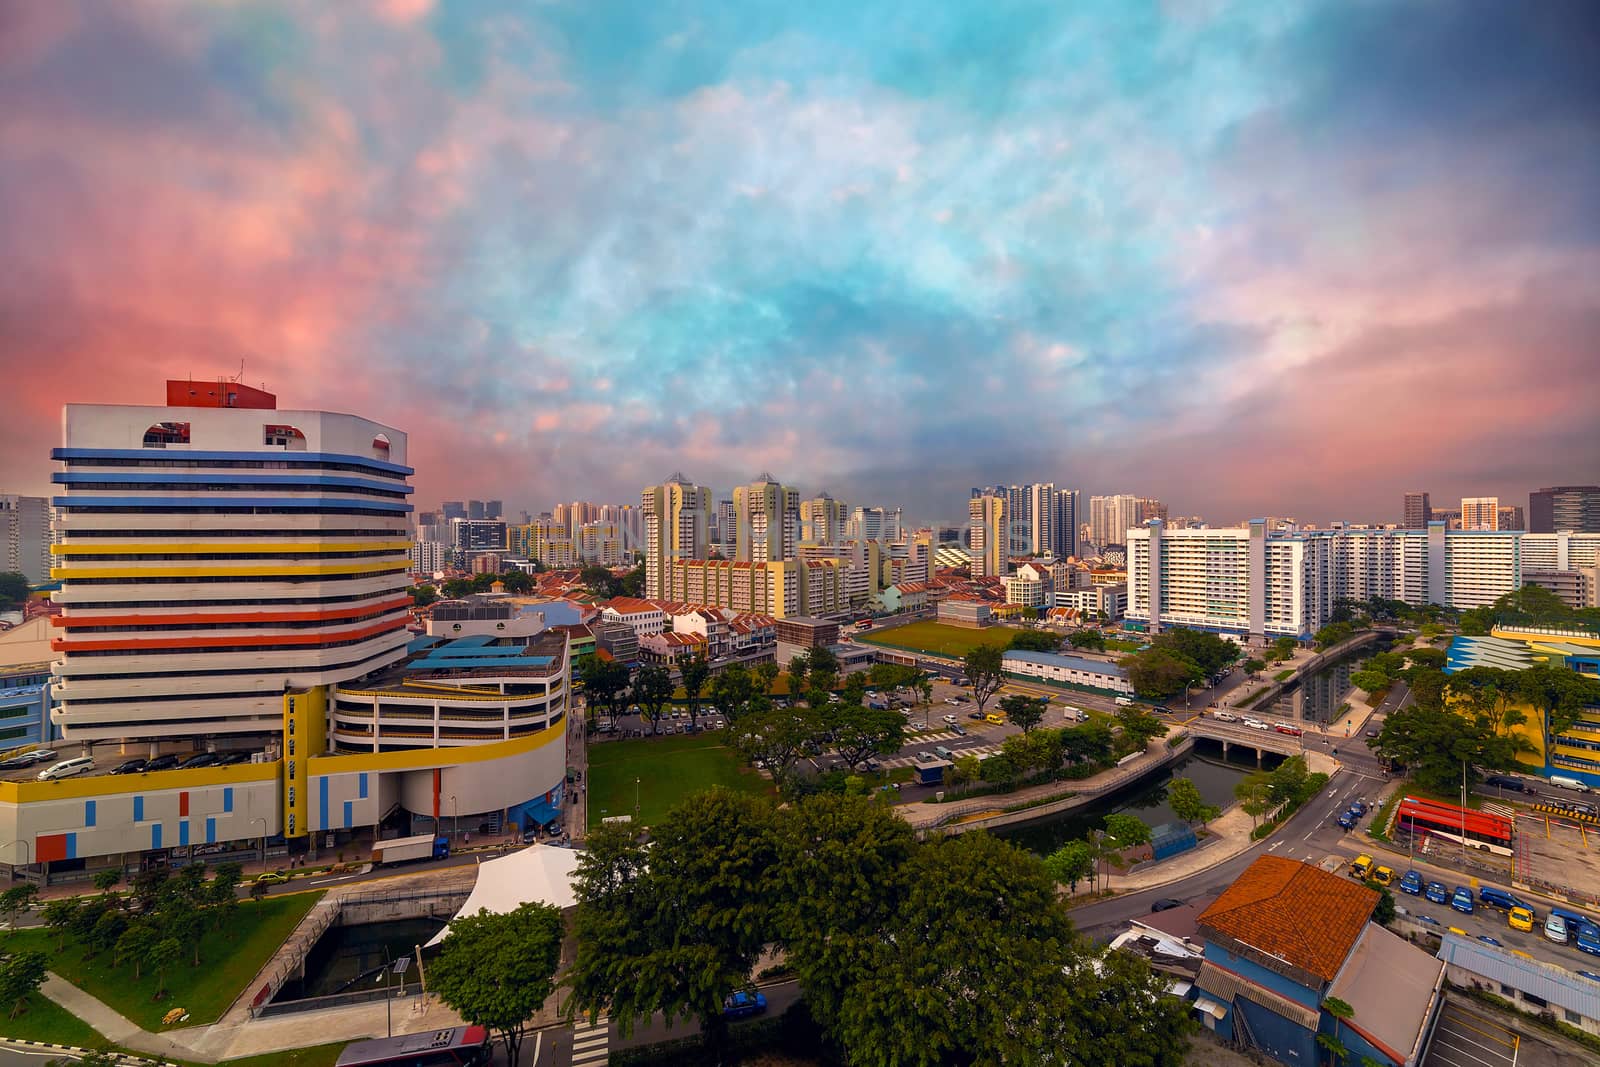 Singapore Rochor commercial business and residential apartment mixed area cityscape during sunset